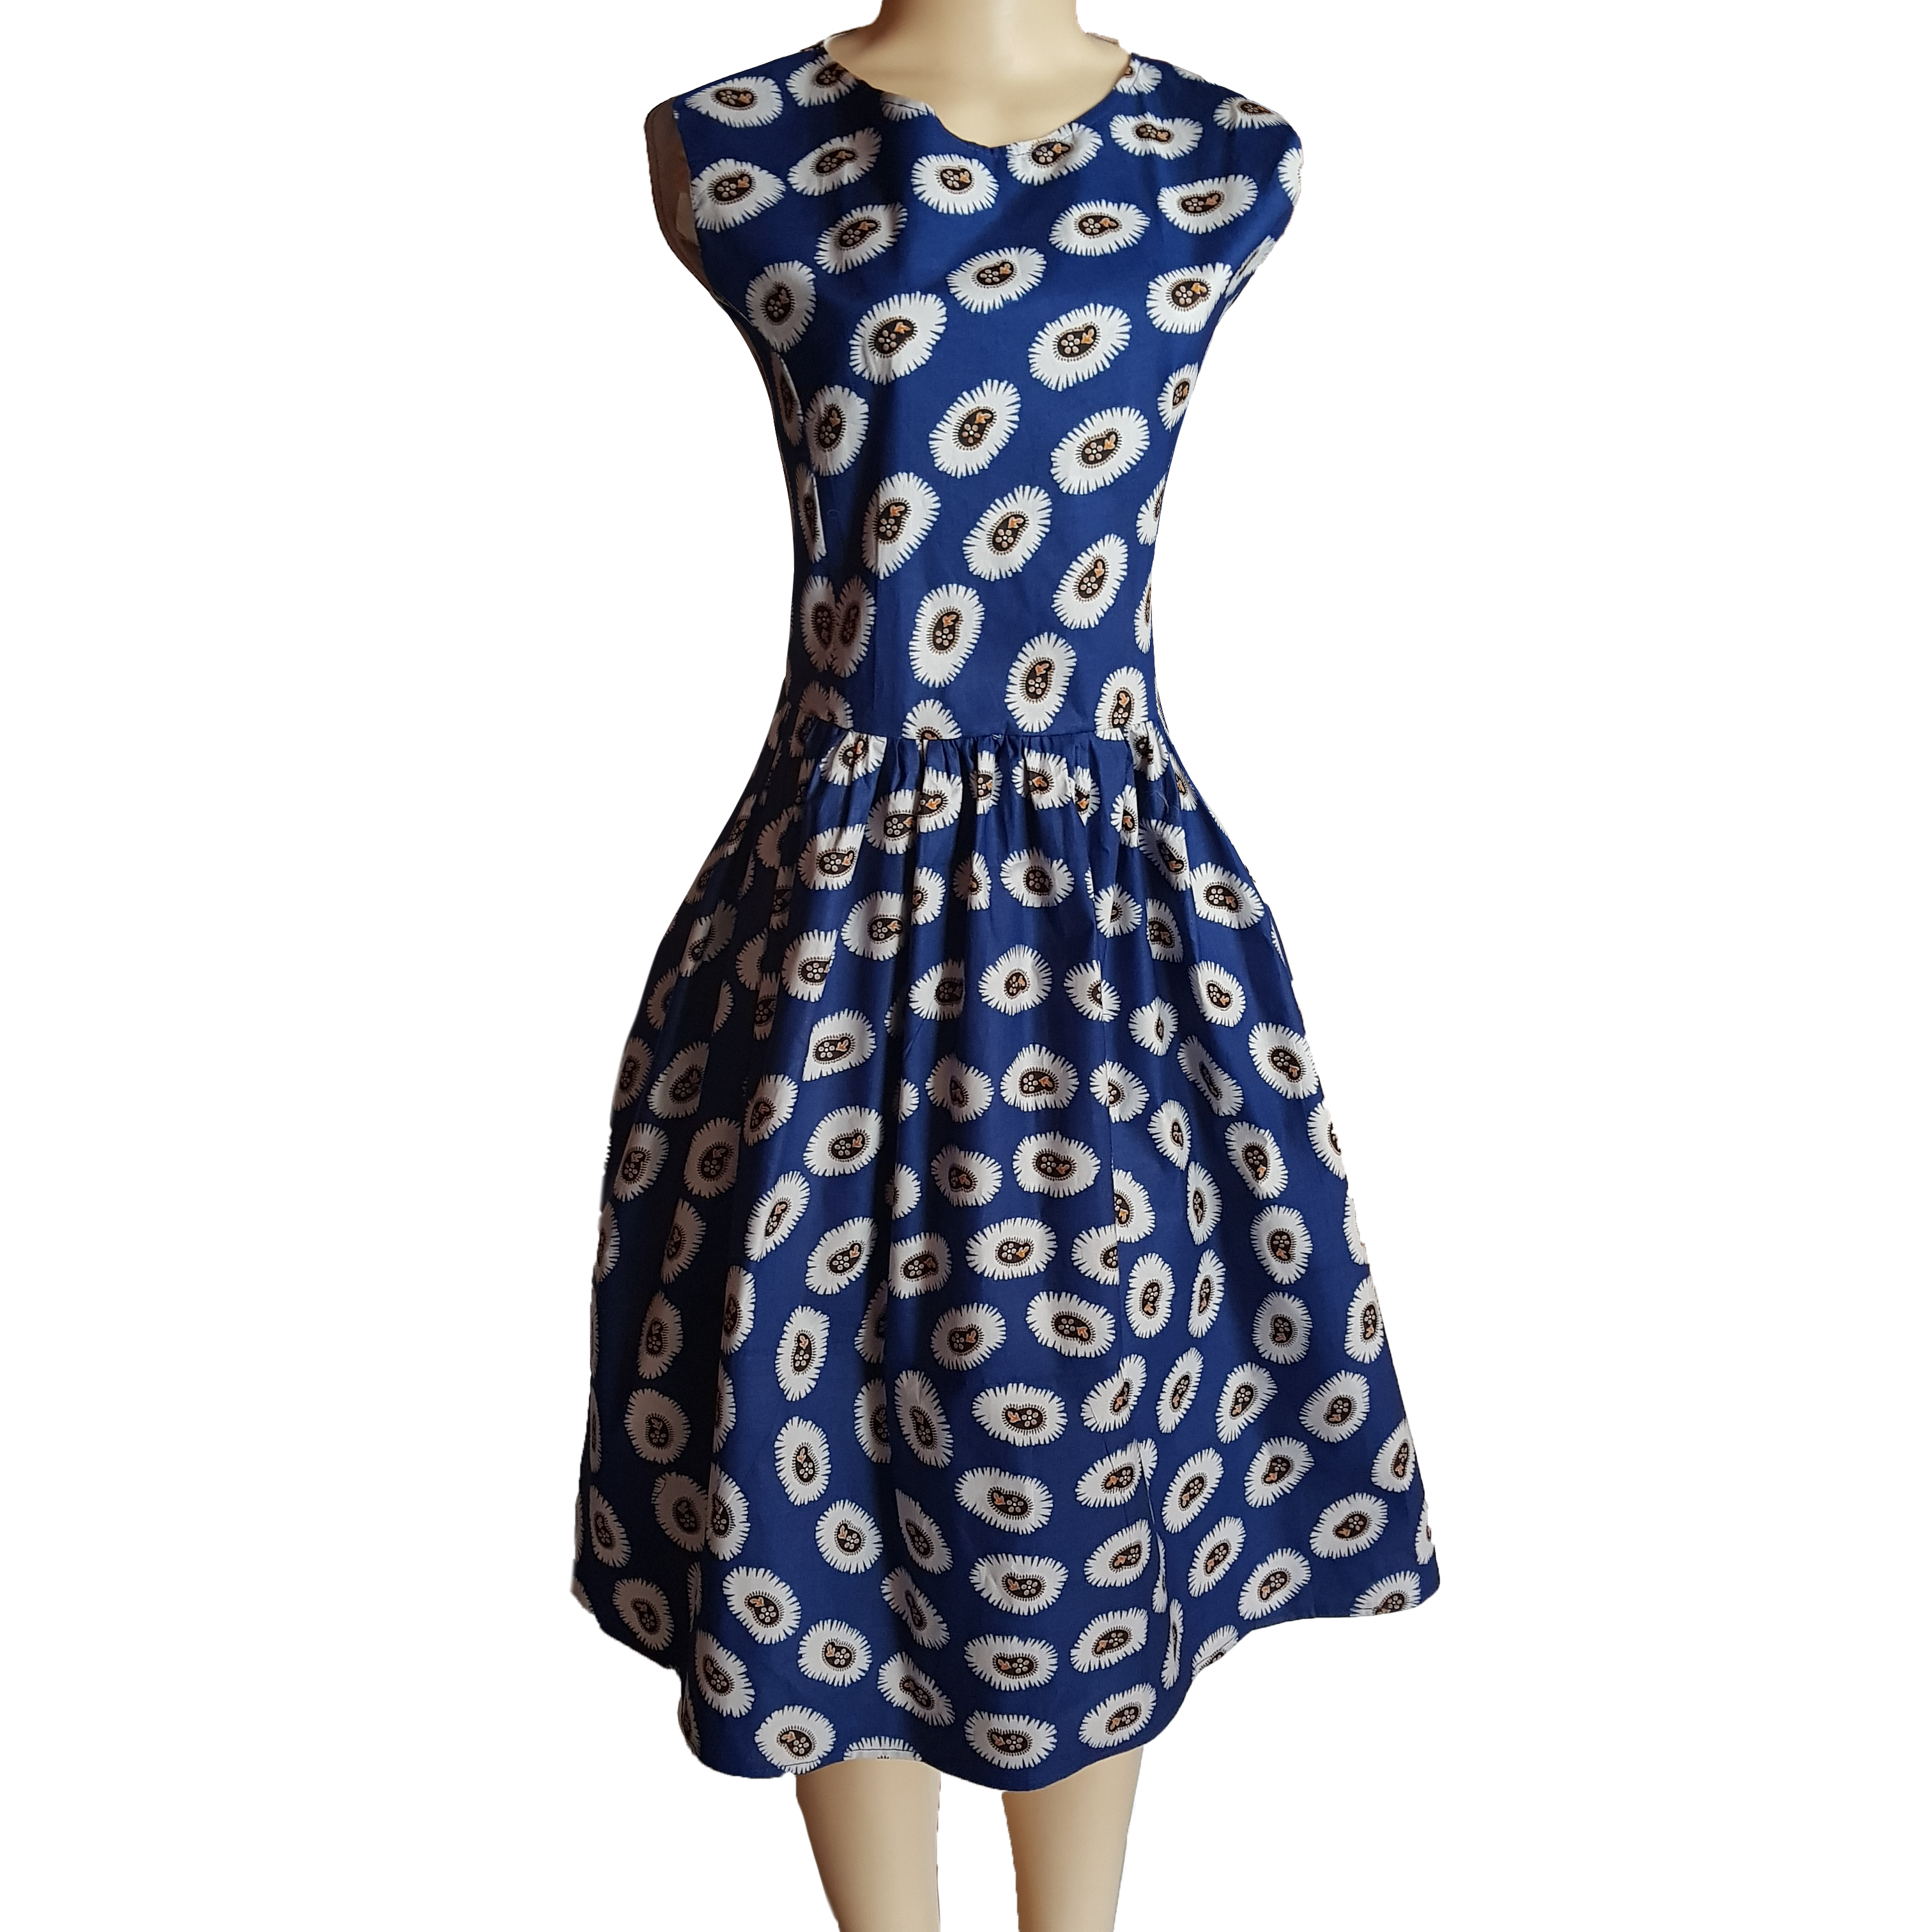 Modern traditional angolan print summer dress 6 an awesome look for spring and summer. An angolan traditional blue print made into a modern traditional summer dress, creating a comfortable and feel free dress for you to wear on a casual relaxing day out.